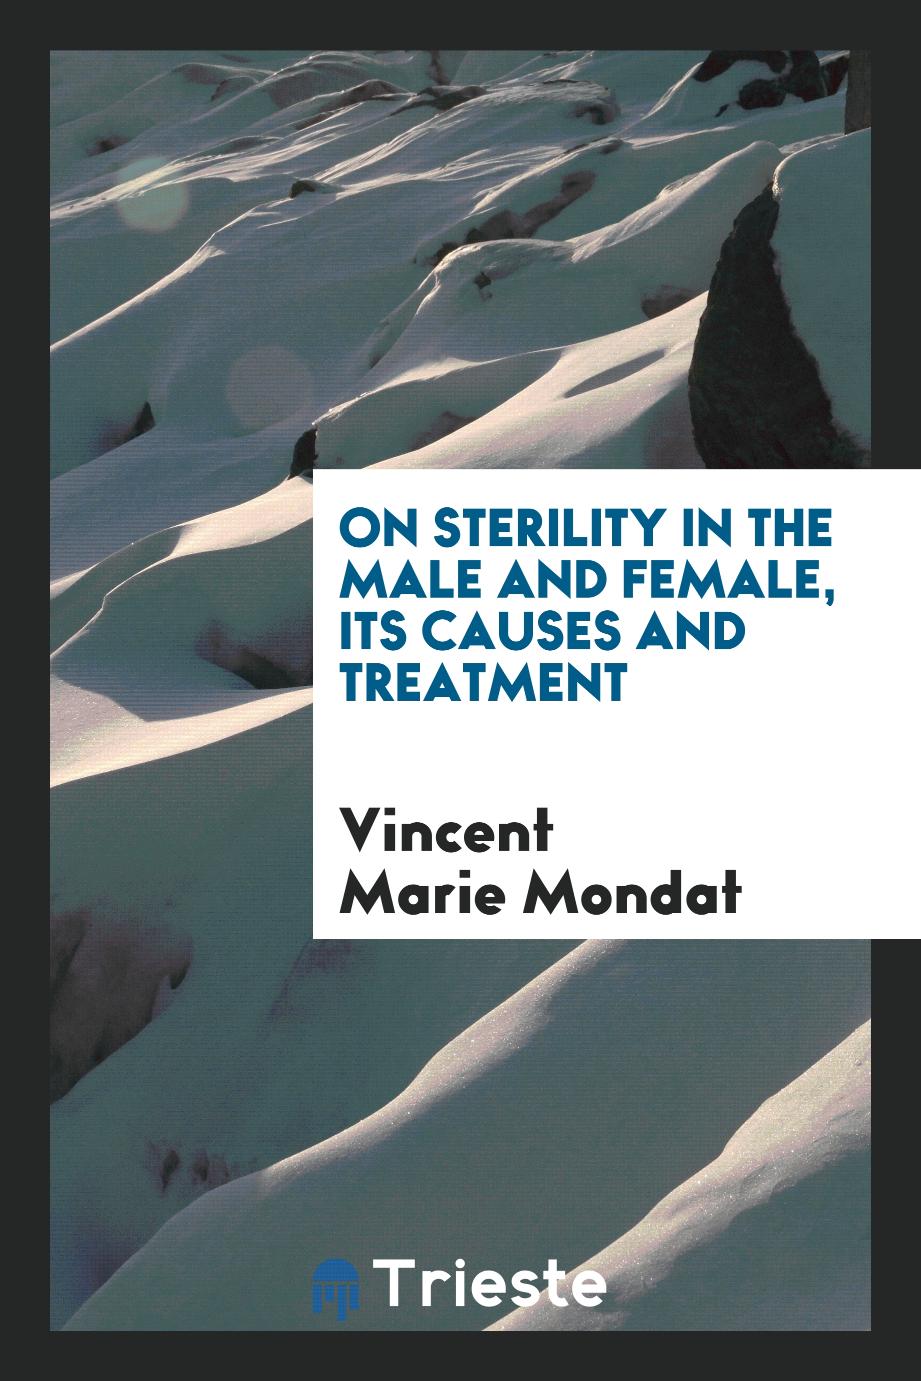 On sterility in the male and female, its causes and treatment